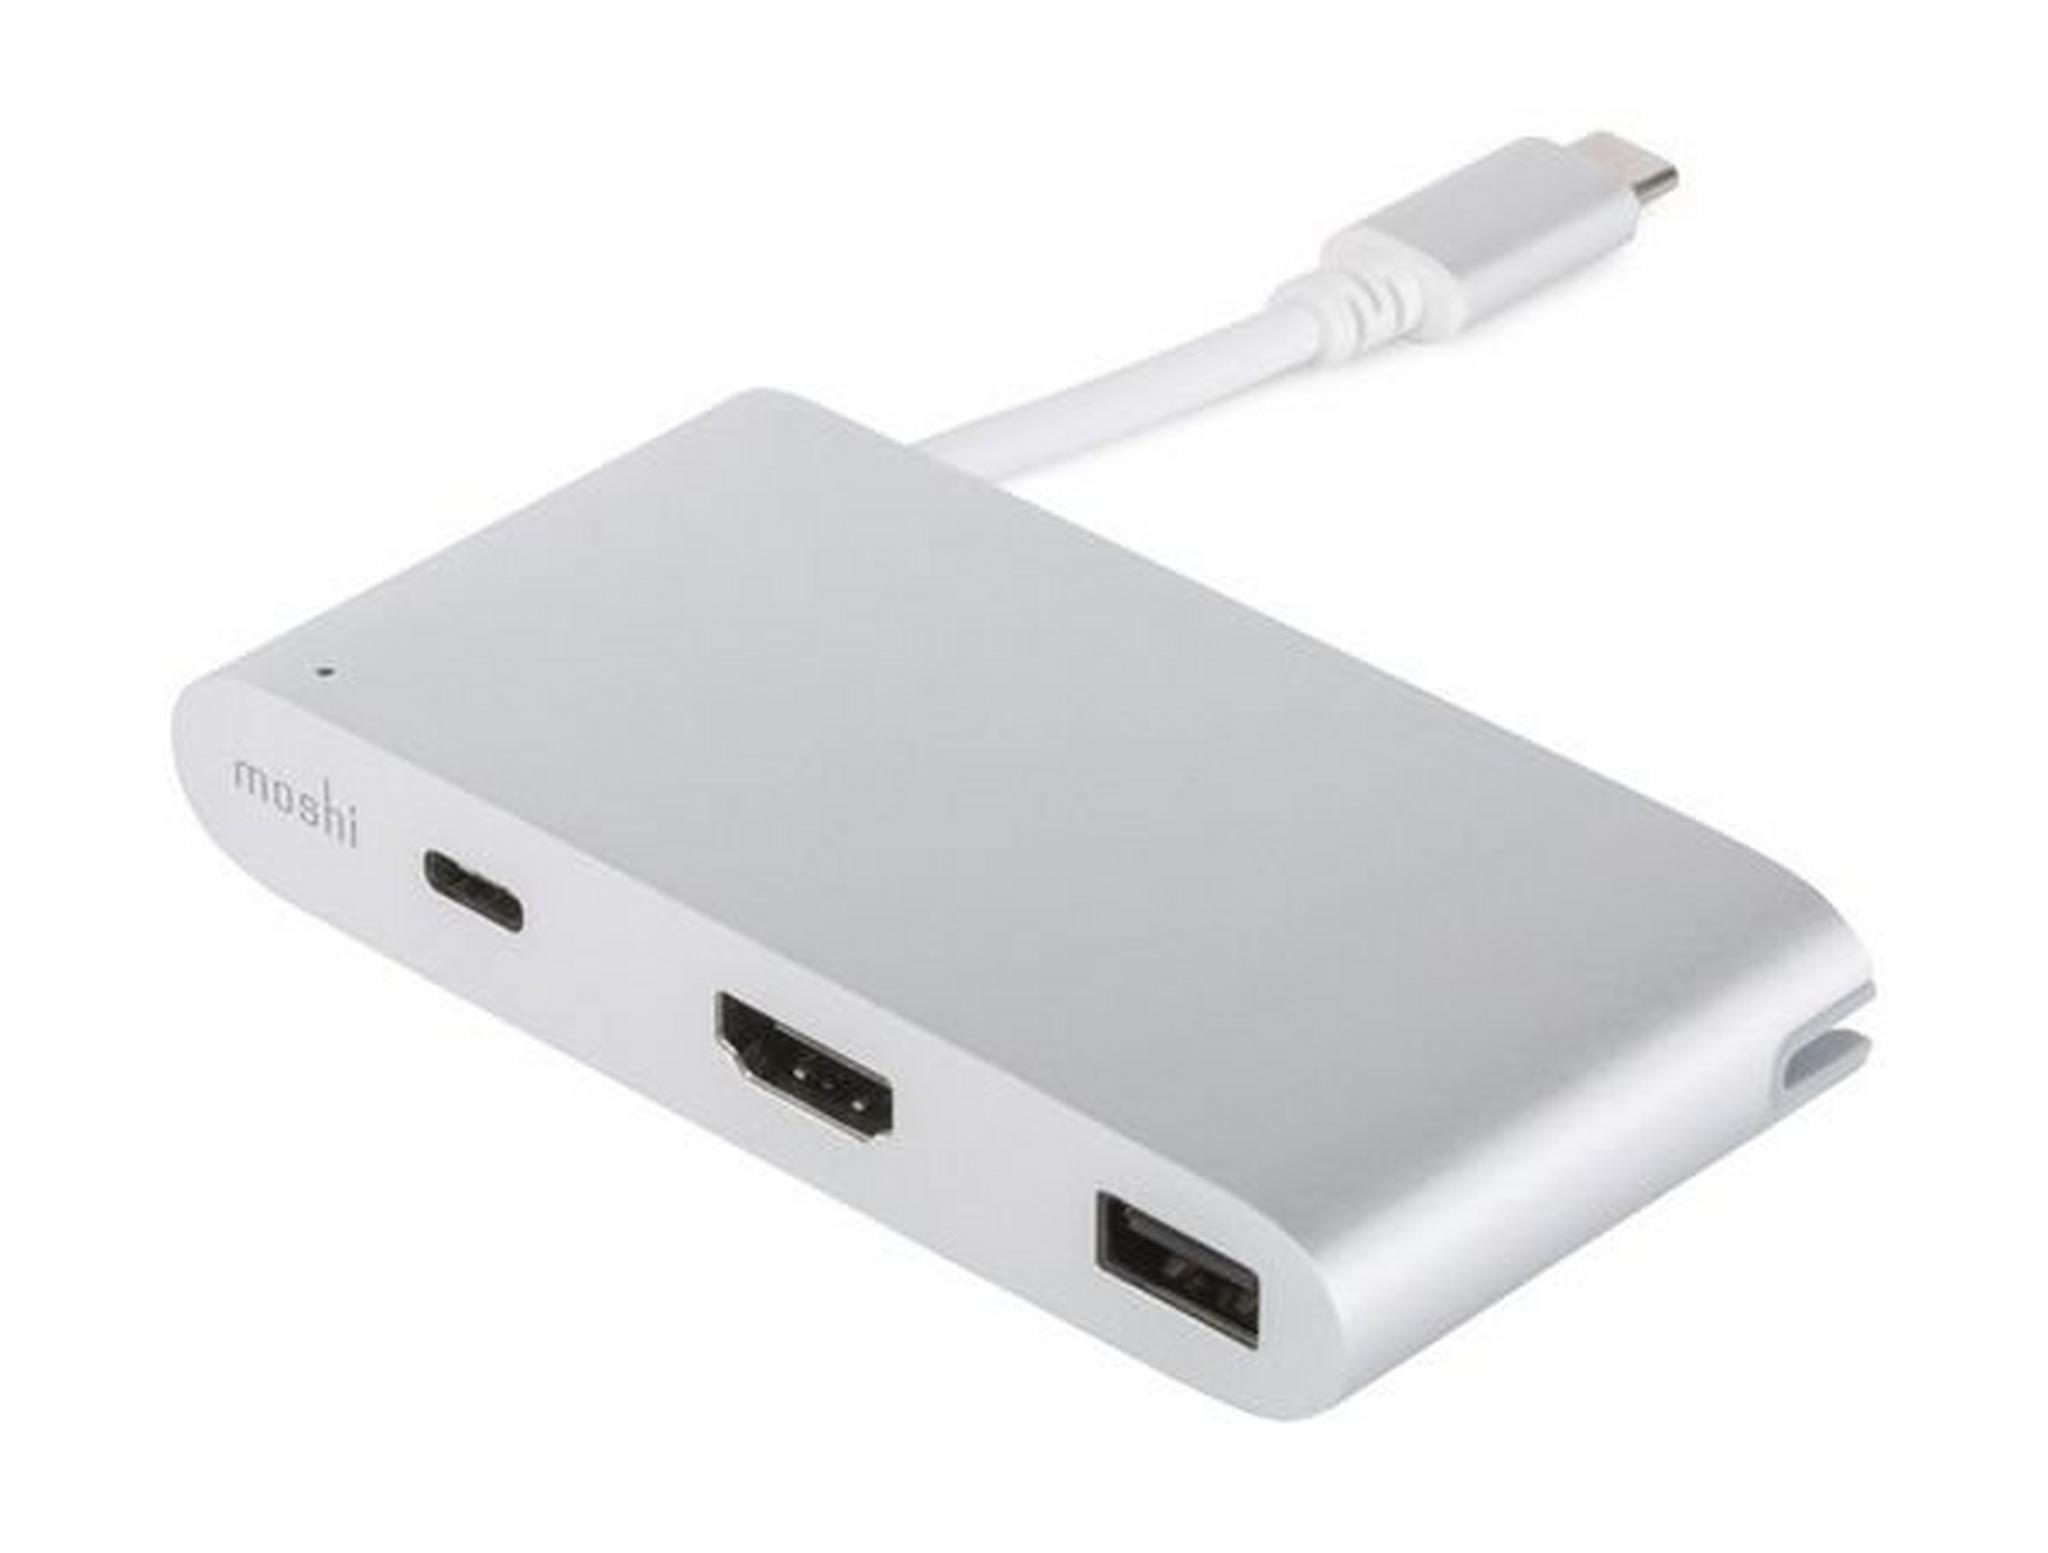 Moshi USB 3.0 Type-C Multiport Adapter – Silver